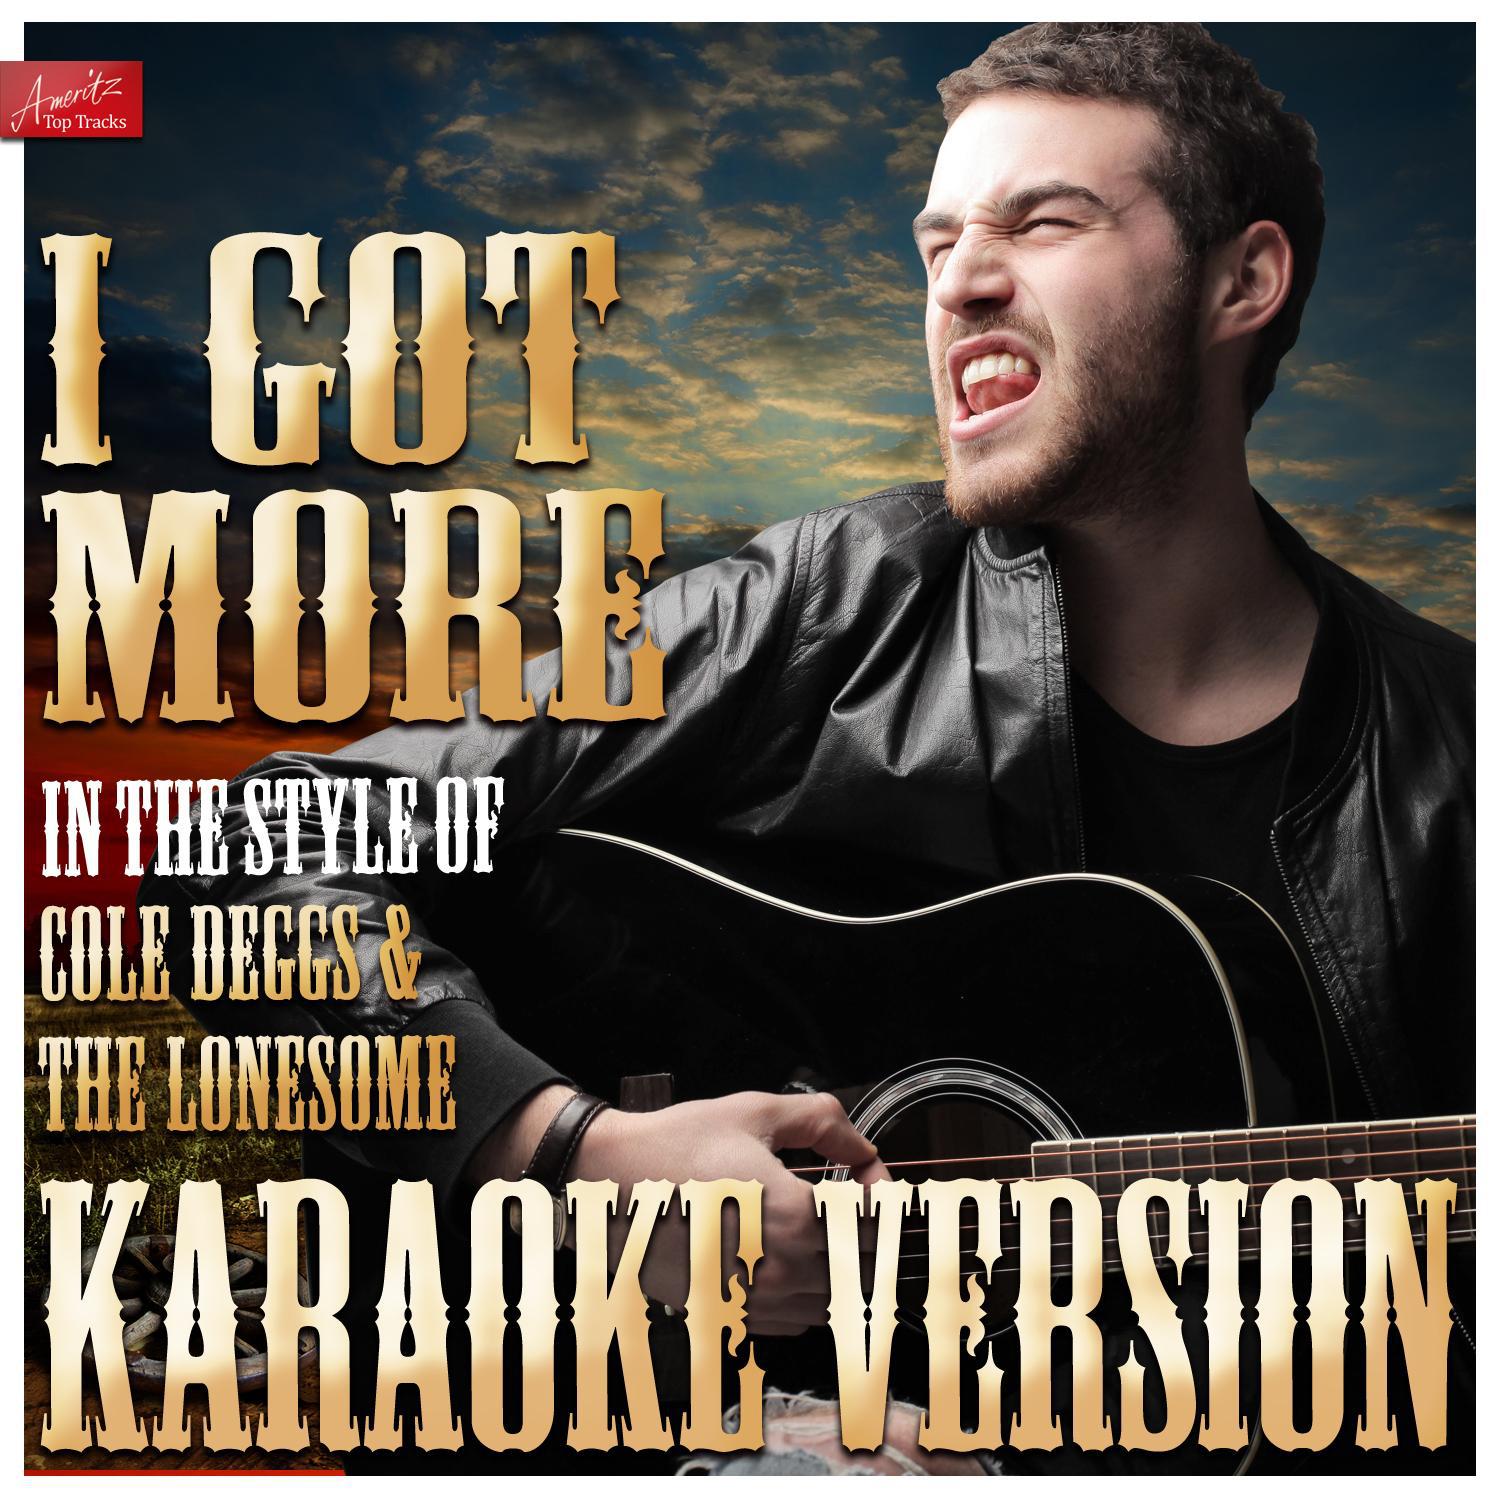 I Got More (In the Style of Cole Deggs & The Lonesome) [Karaoke Version]